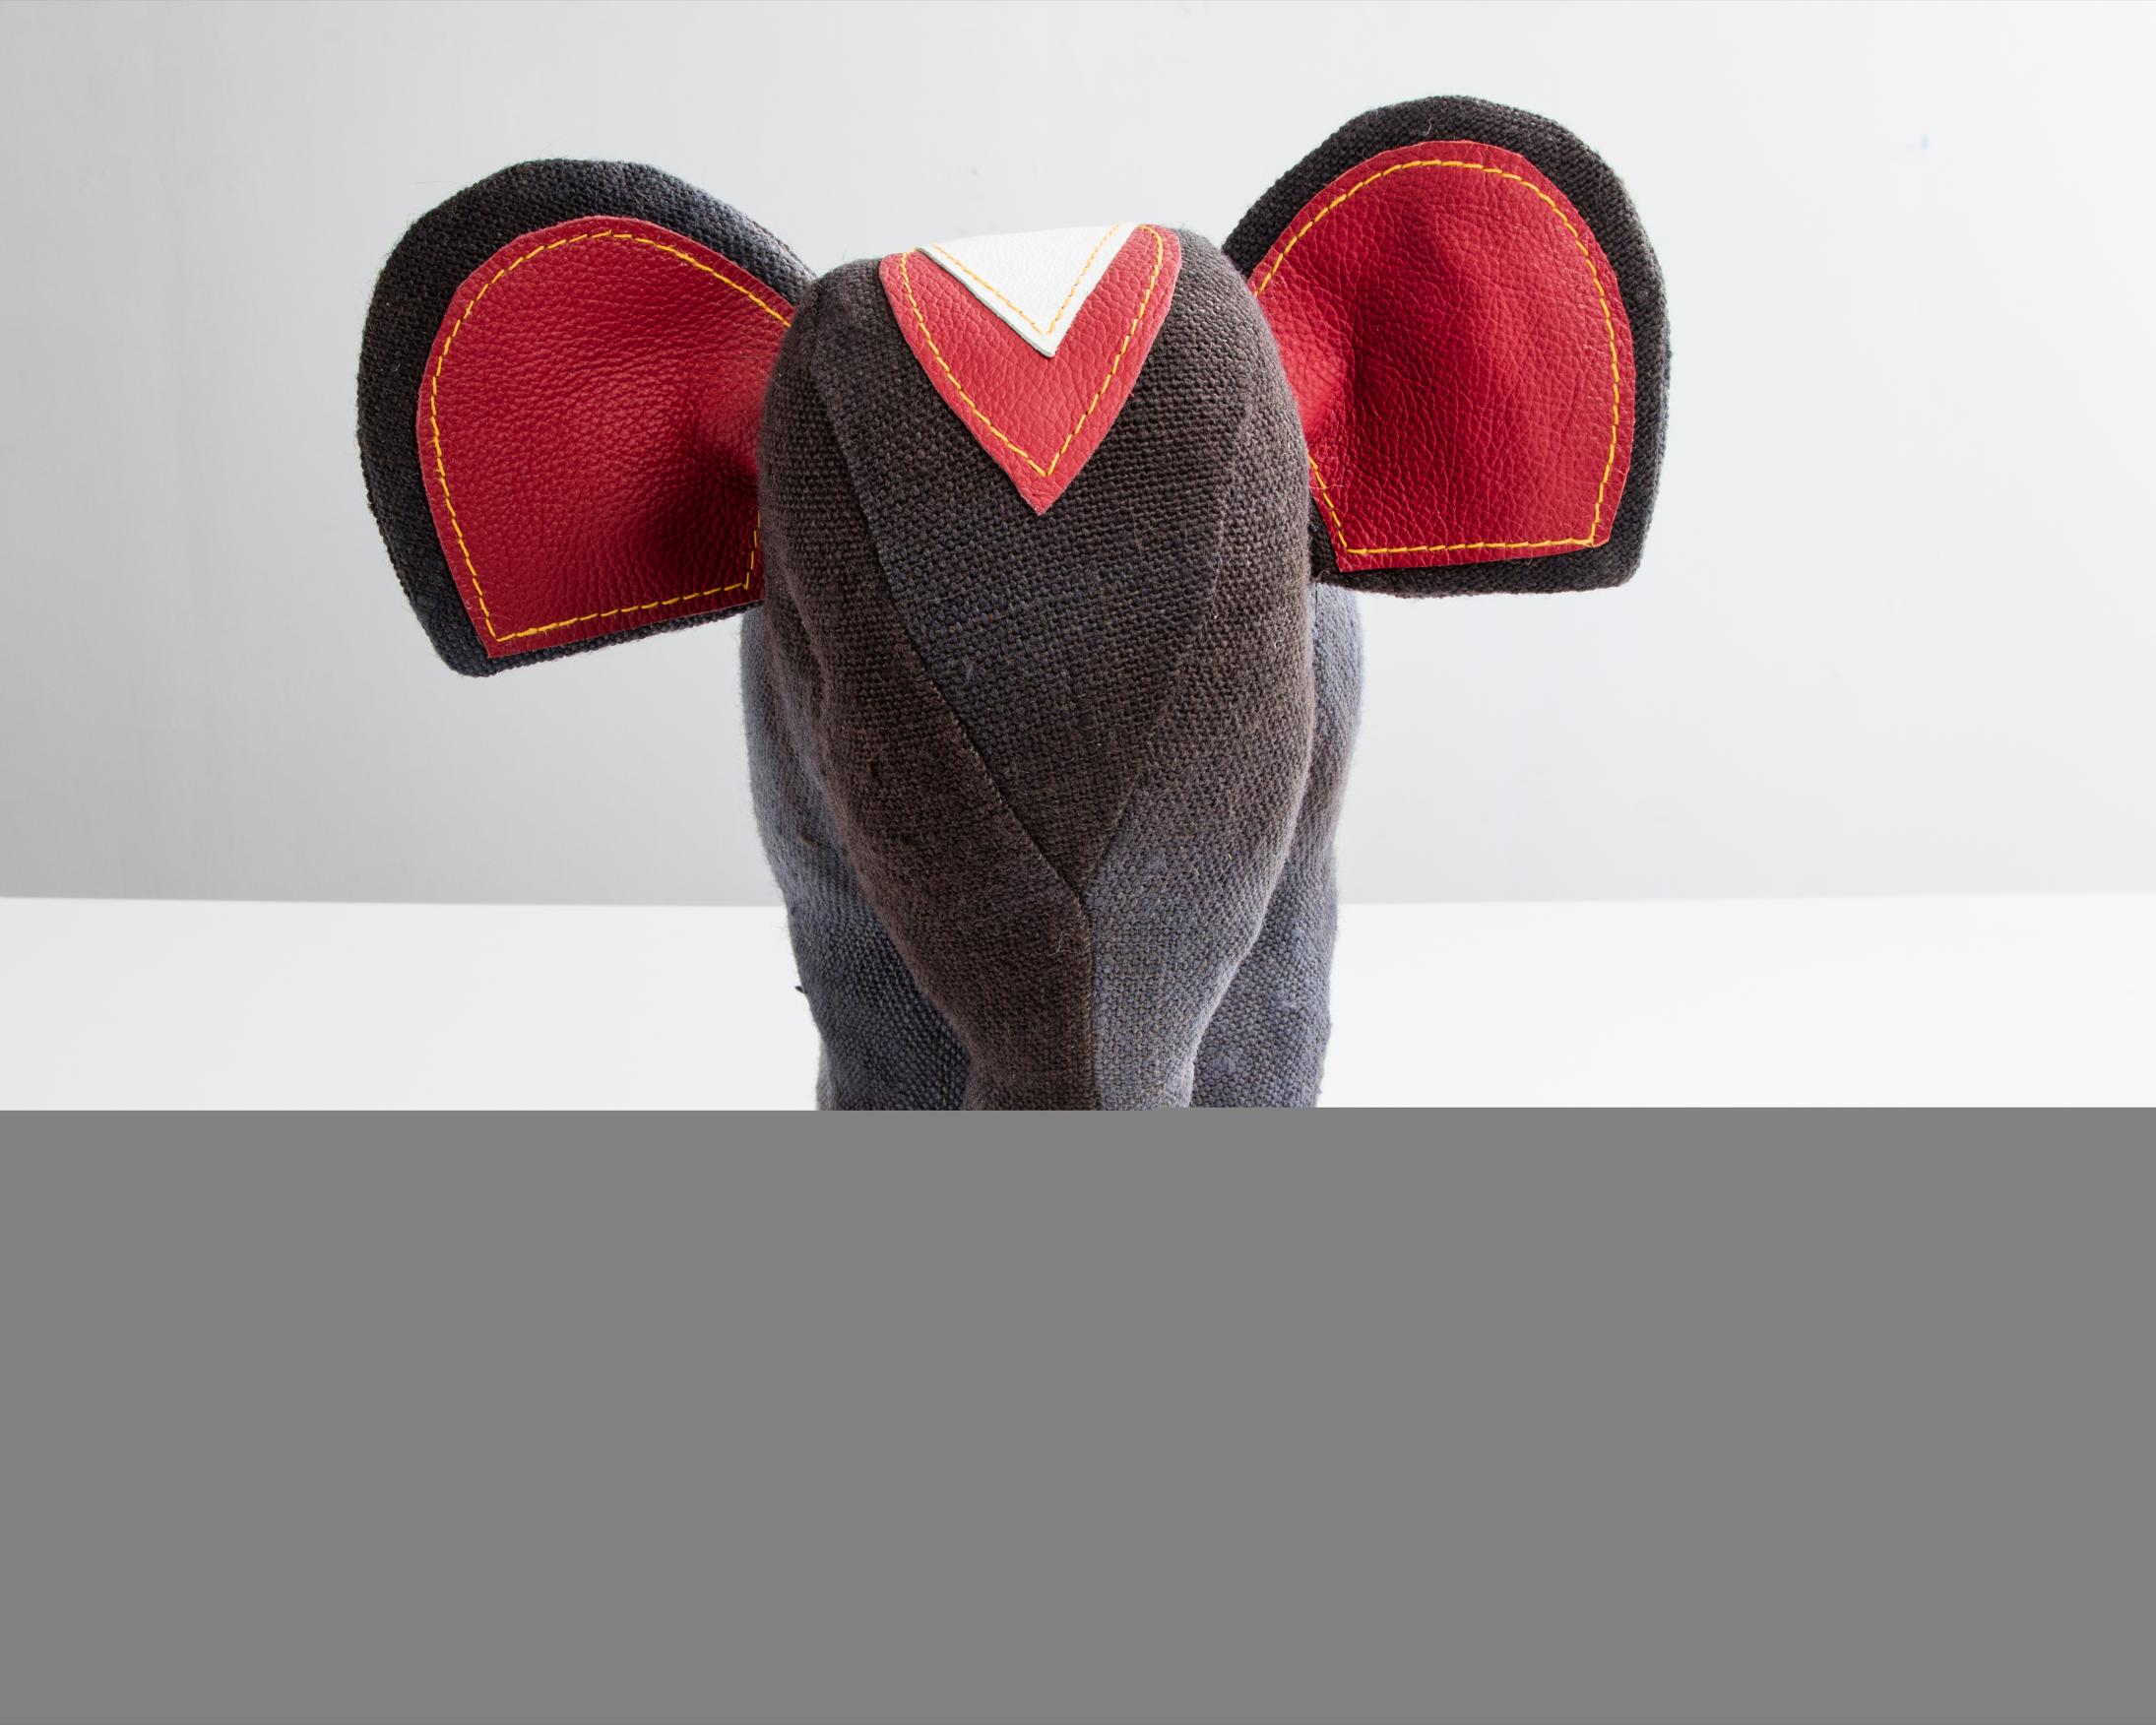 Modern Therapeutic Elephant Toy in Jute and Leather by Renate Müller, 1981-1982